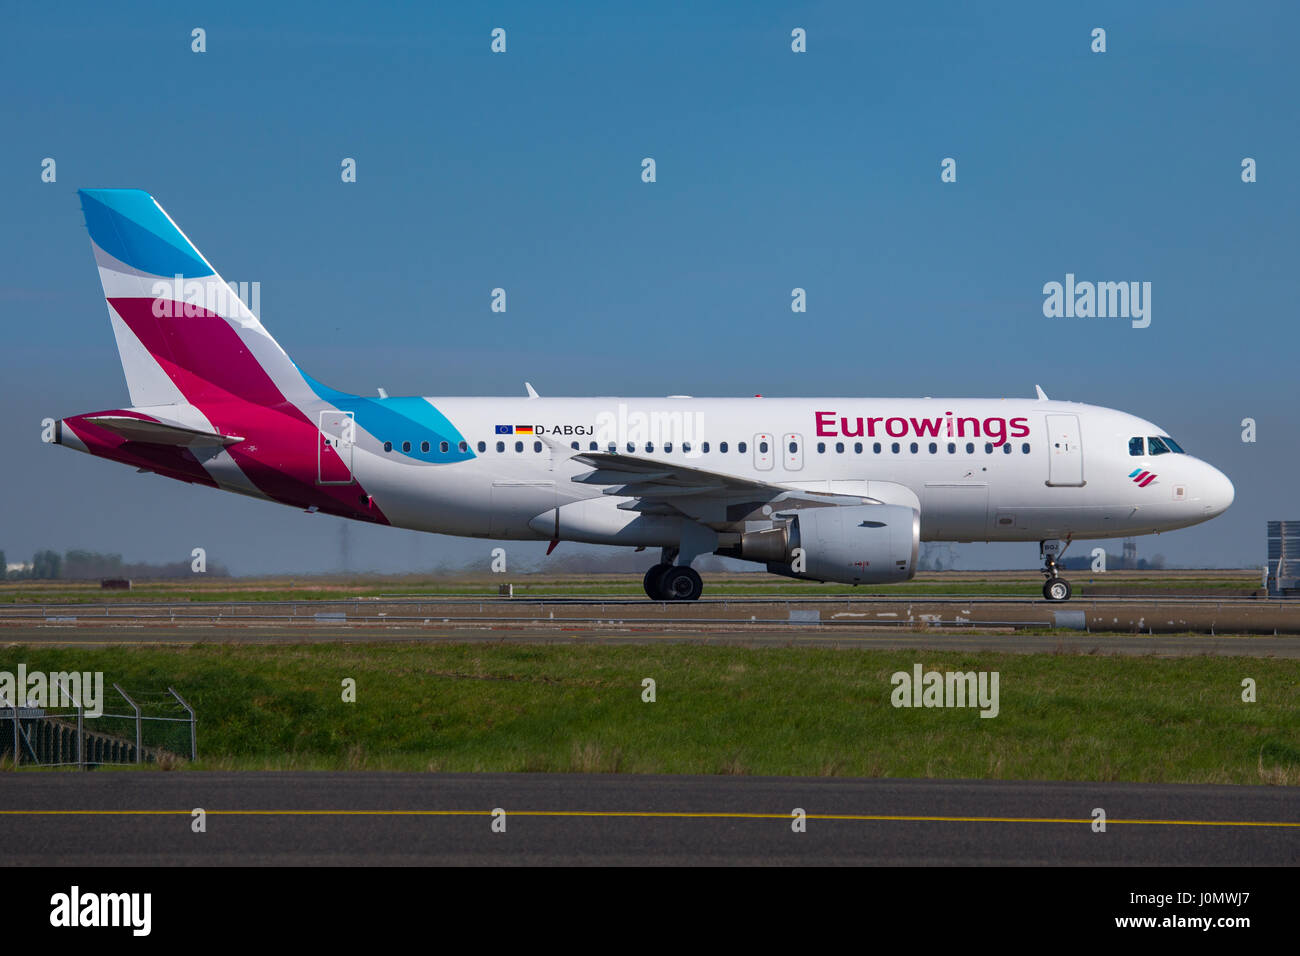 Eurowings Airbus A319 Aircraft Image Stock Photo